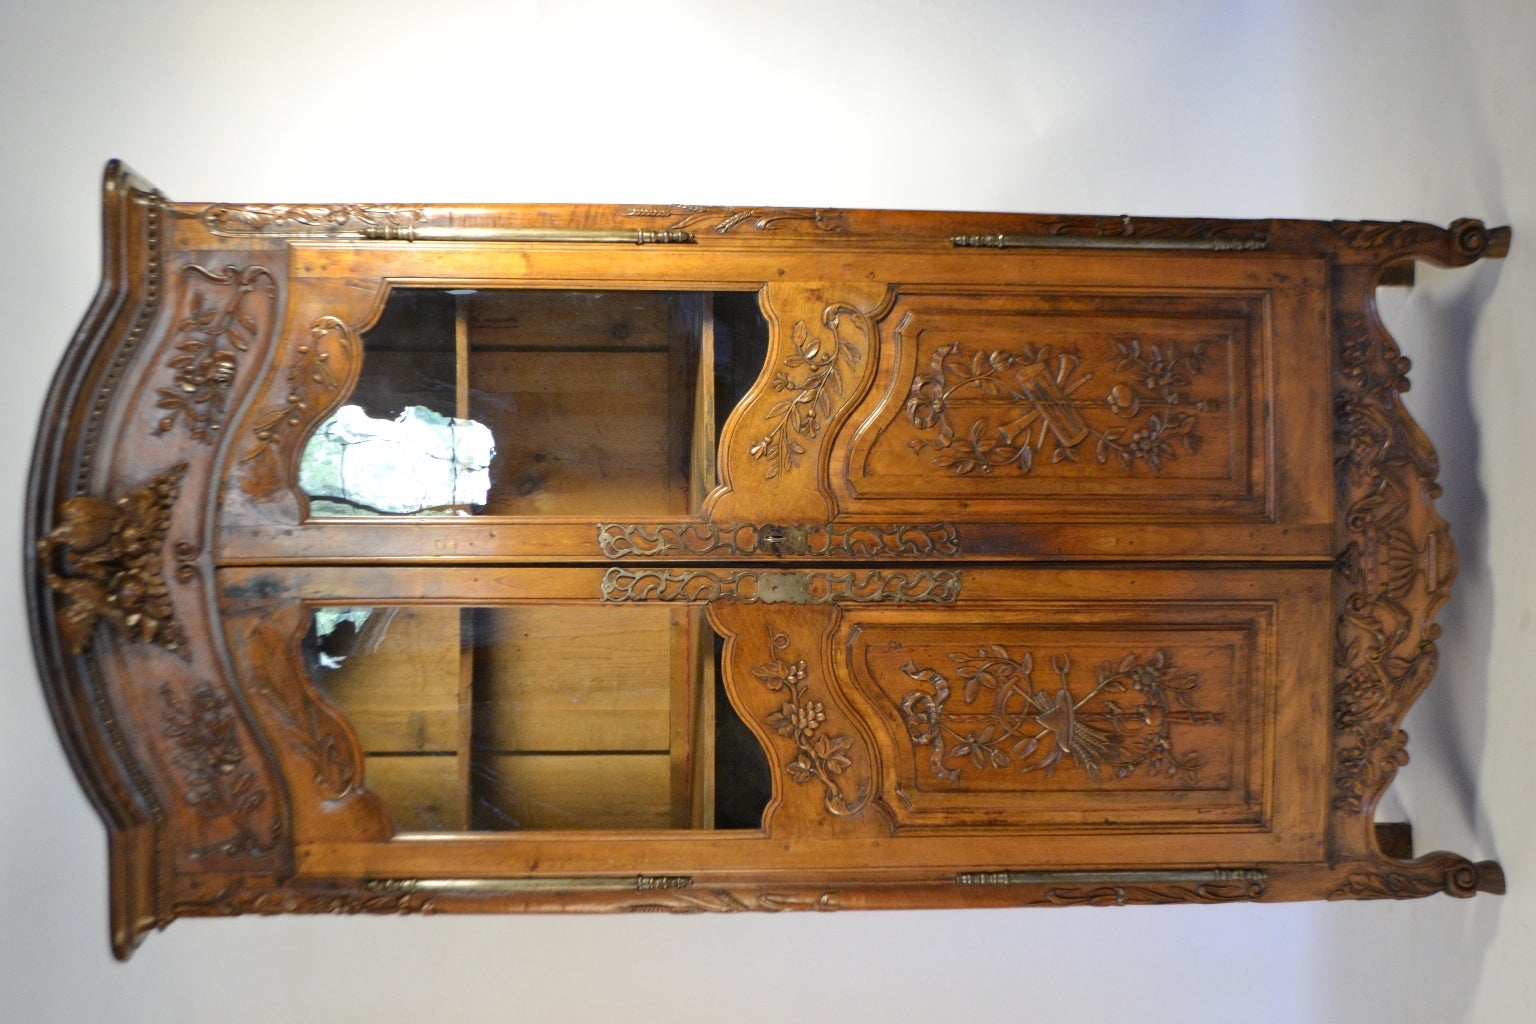 Wonderfully carved walnut armoire in the Provençal style. Just below the simple cornice is a beaded border that frames an attribute of love, two dove birds. The sides of the armoire and the framing of the doors present a grape vine and wheat motif.